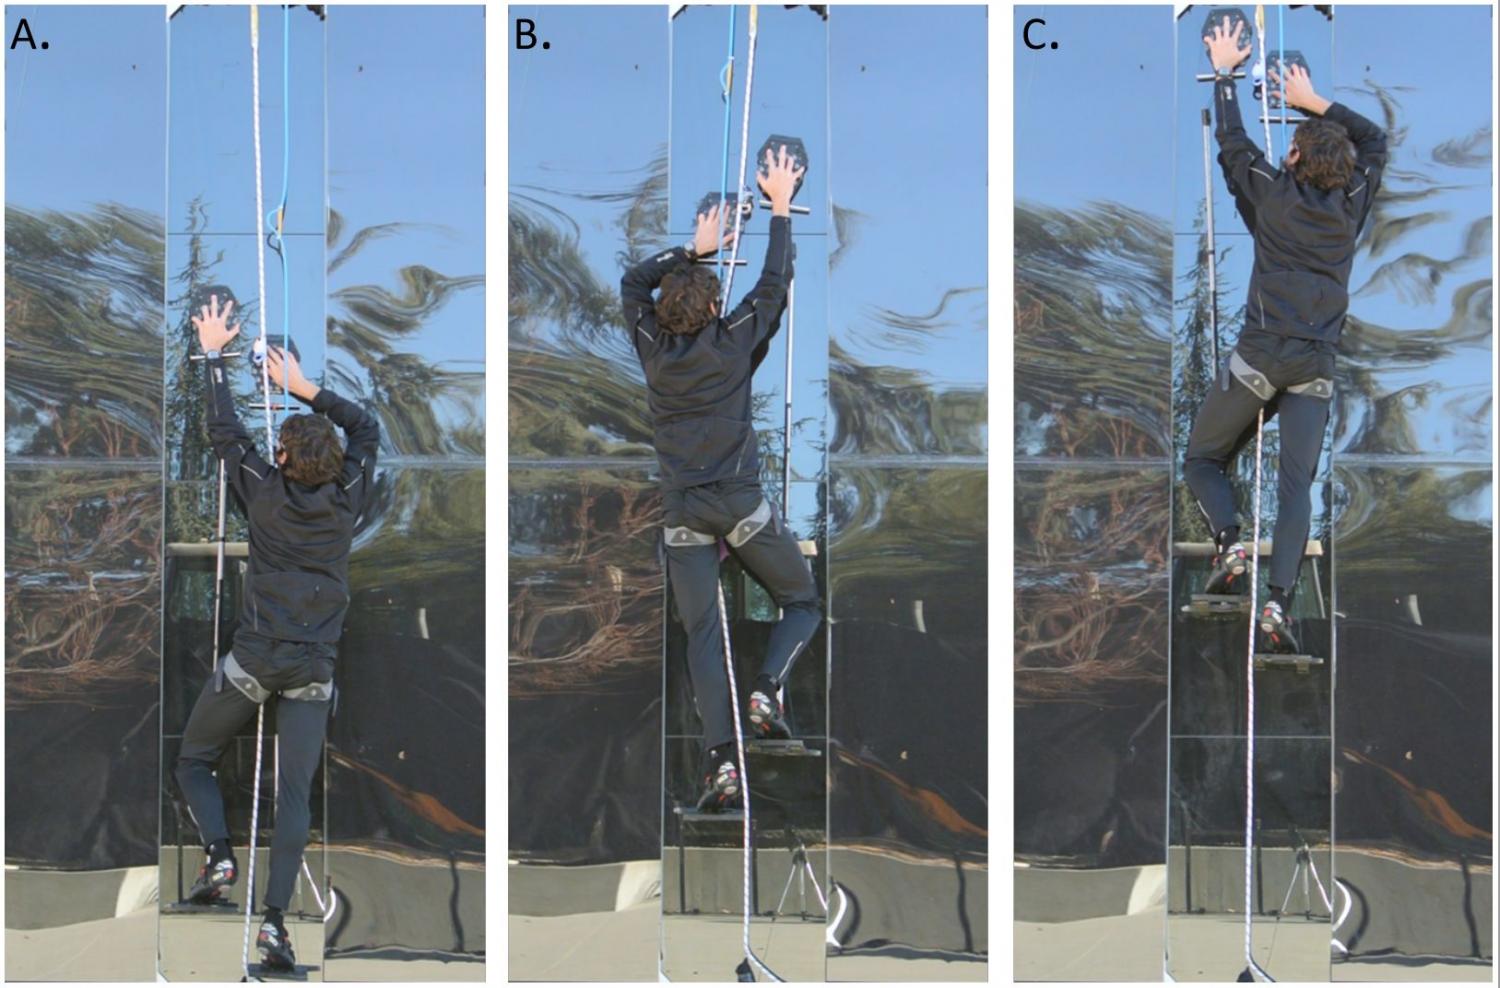 Gecko inspired pads allow researchers to climb glass wall